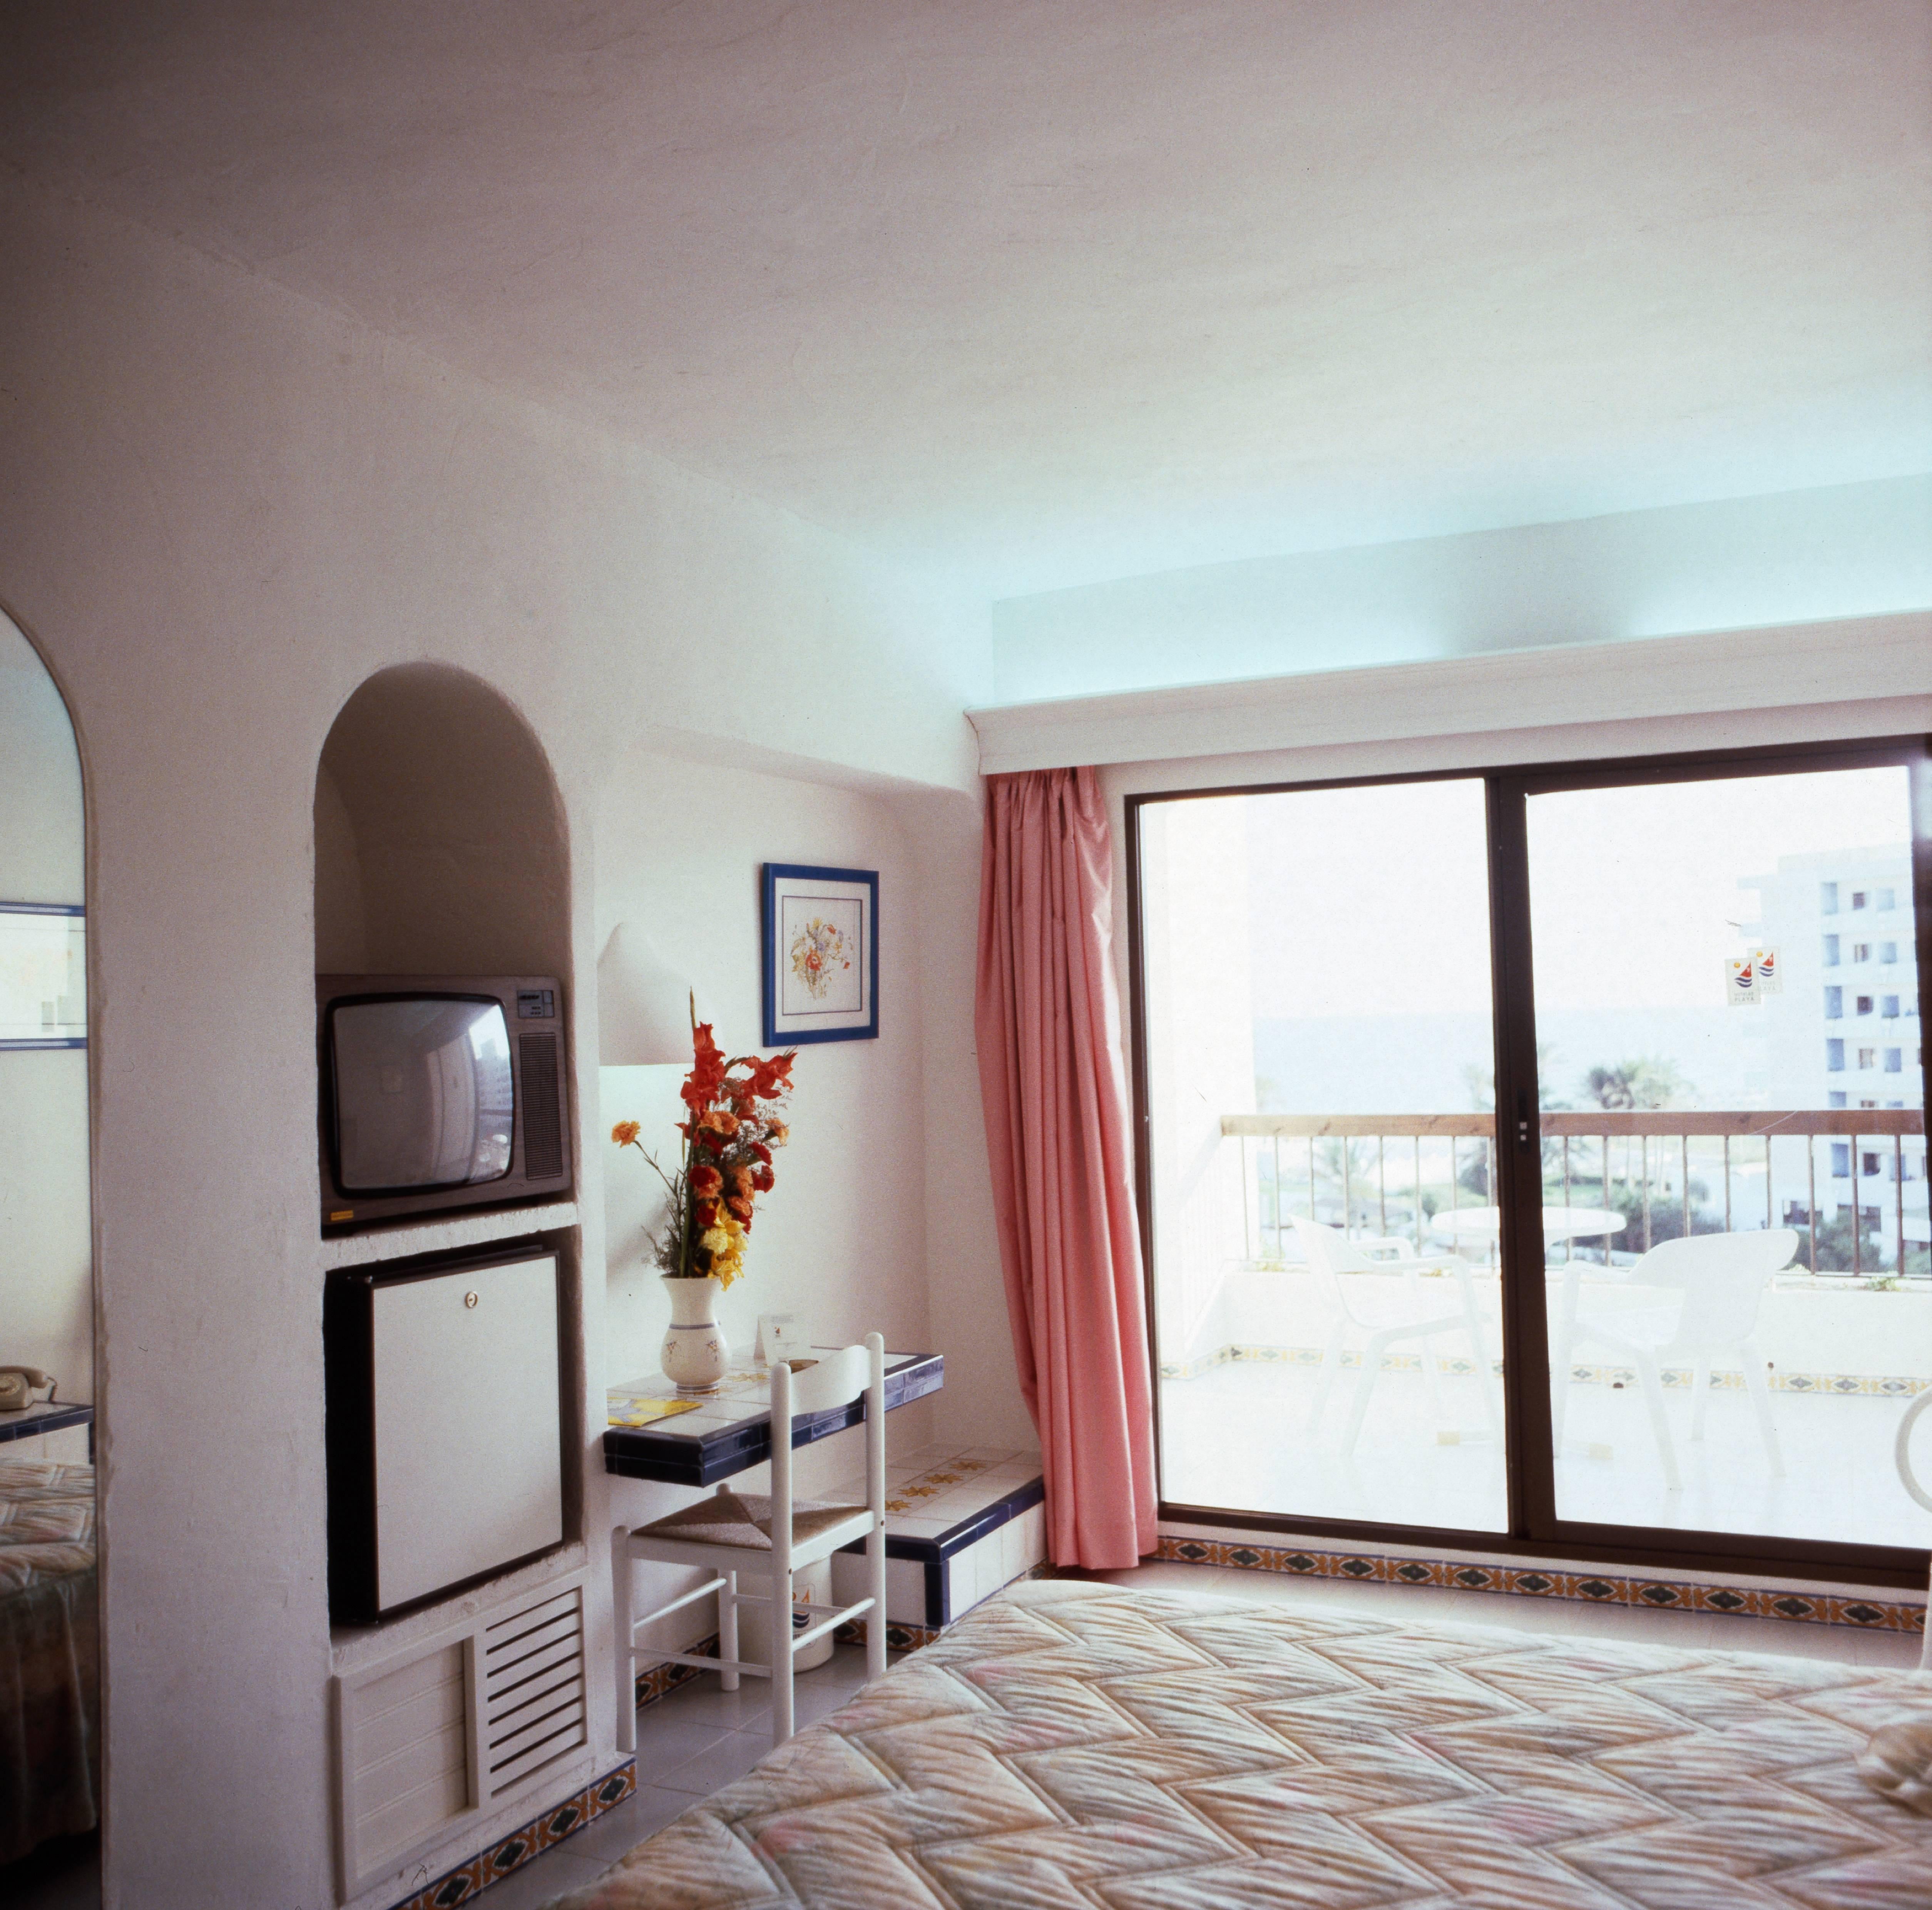 Walter Rudolph Color Photograph - Hotel Lobbies, Rooms and Bars - Hotel Playalinda in Roquetas de Mar, Andalusia